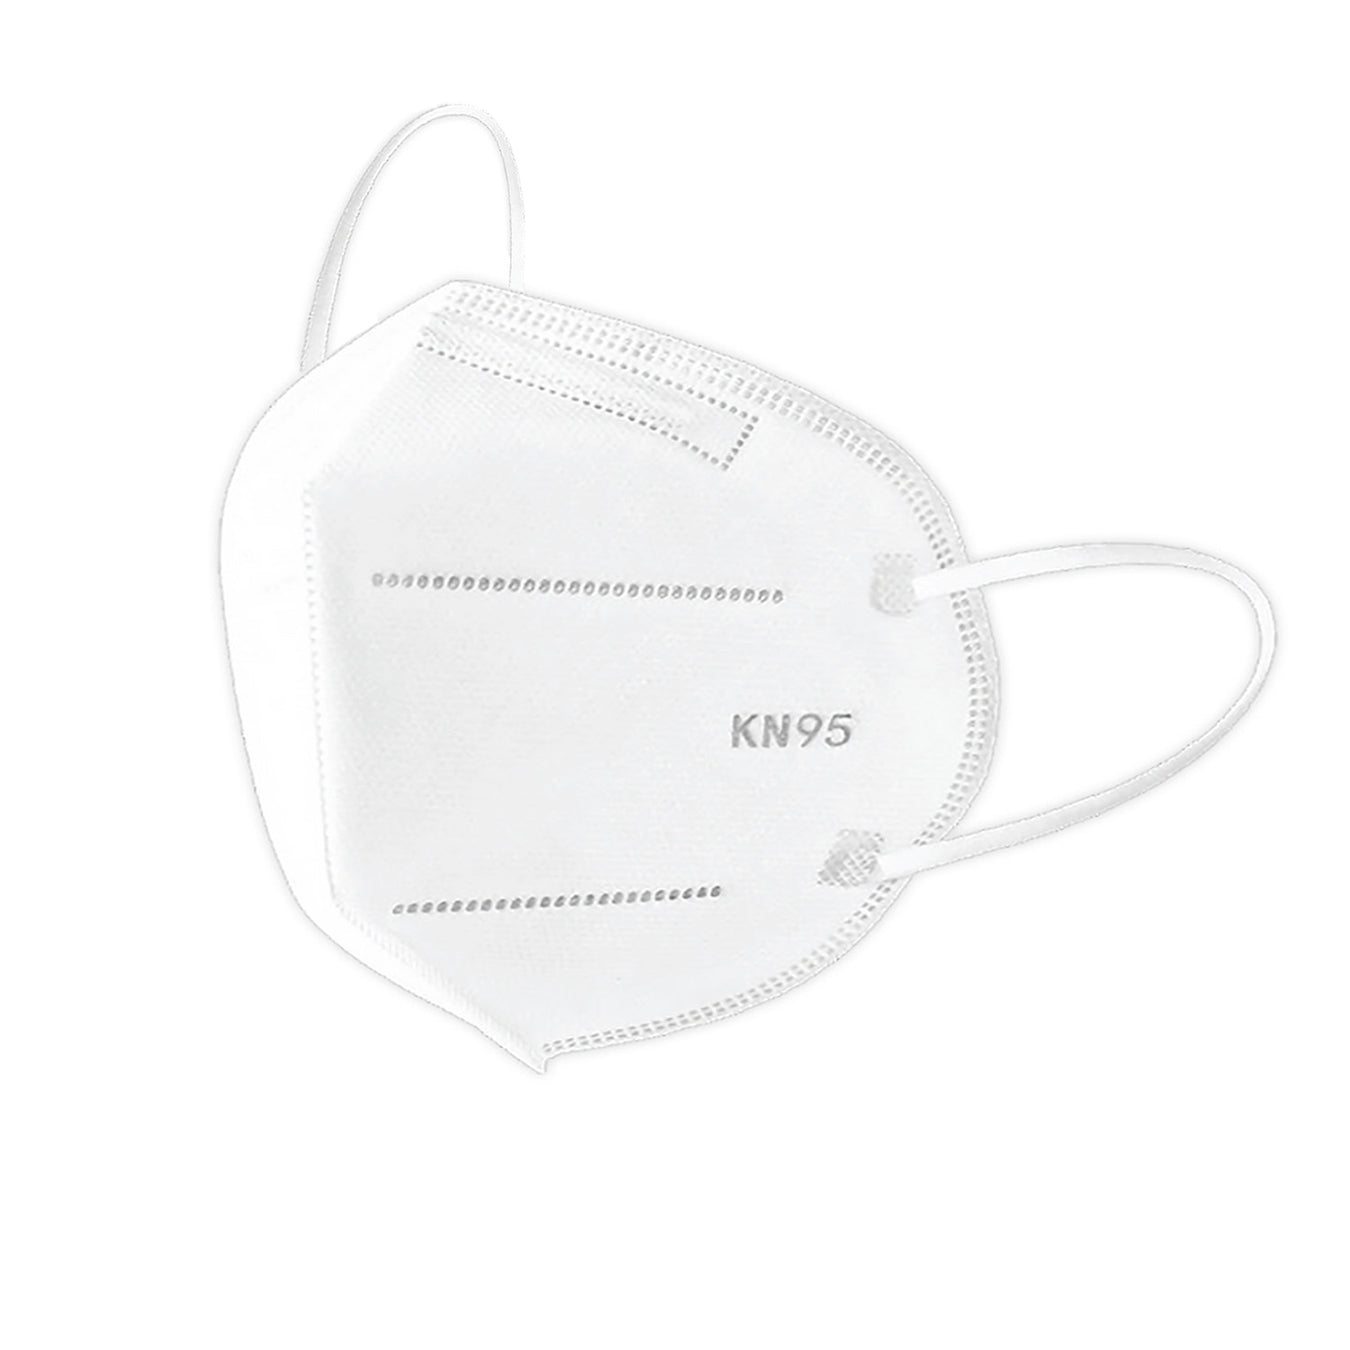 KN95 Masks - Disposable, Protective